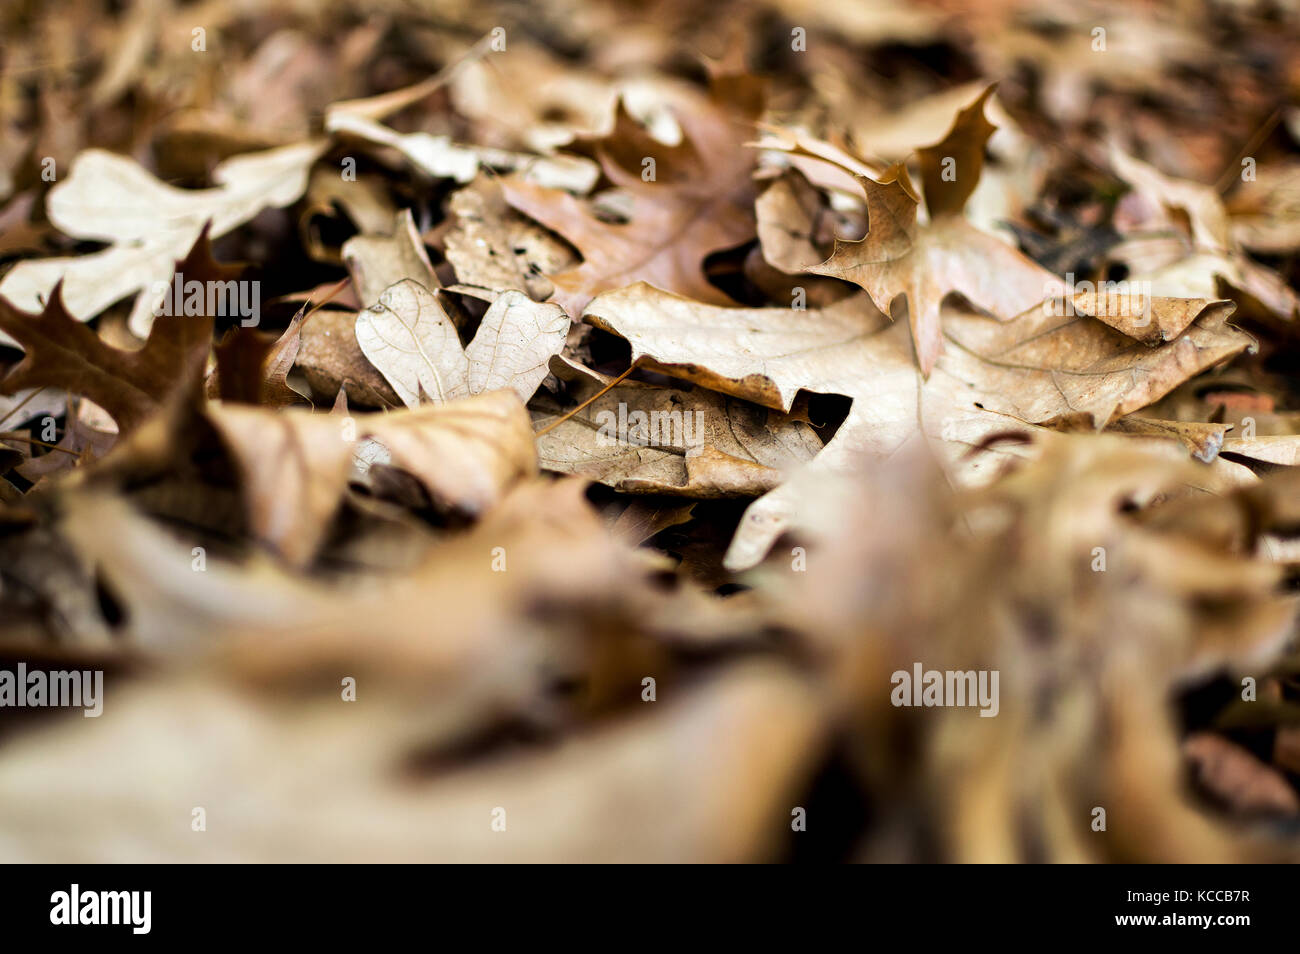 Mattress of dry leaves. Texture of autumn leaves. Leaves of tree on the floor. Stock Photo